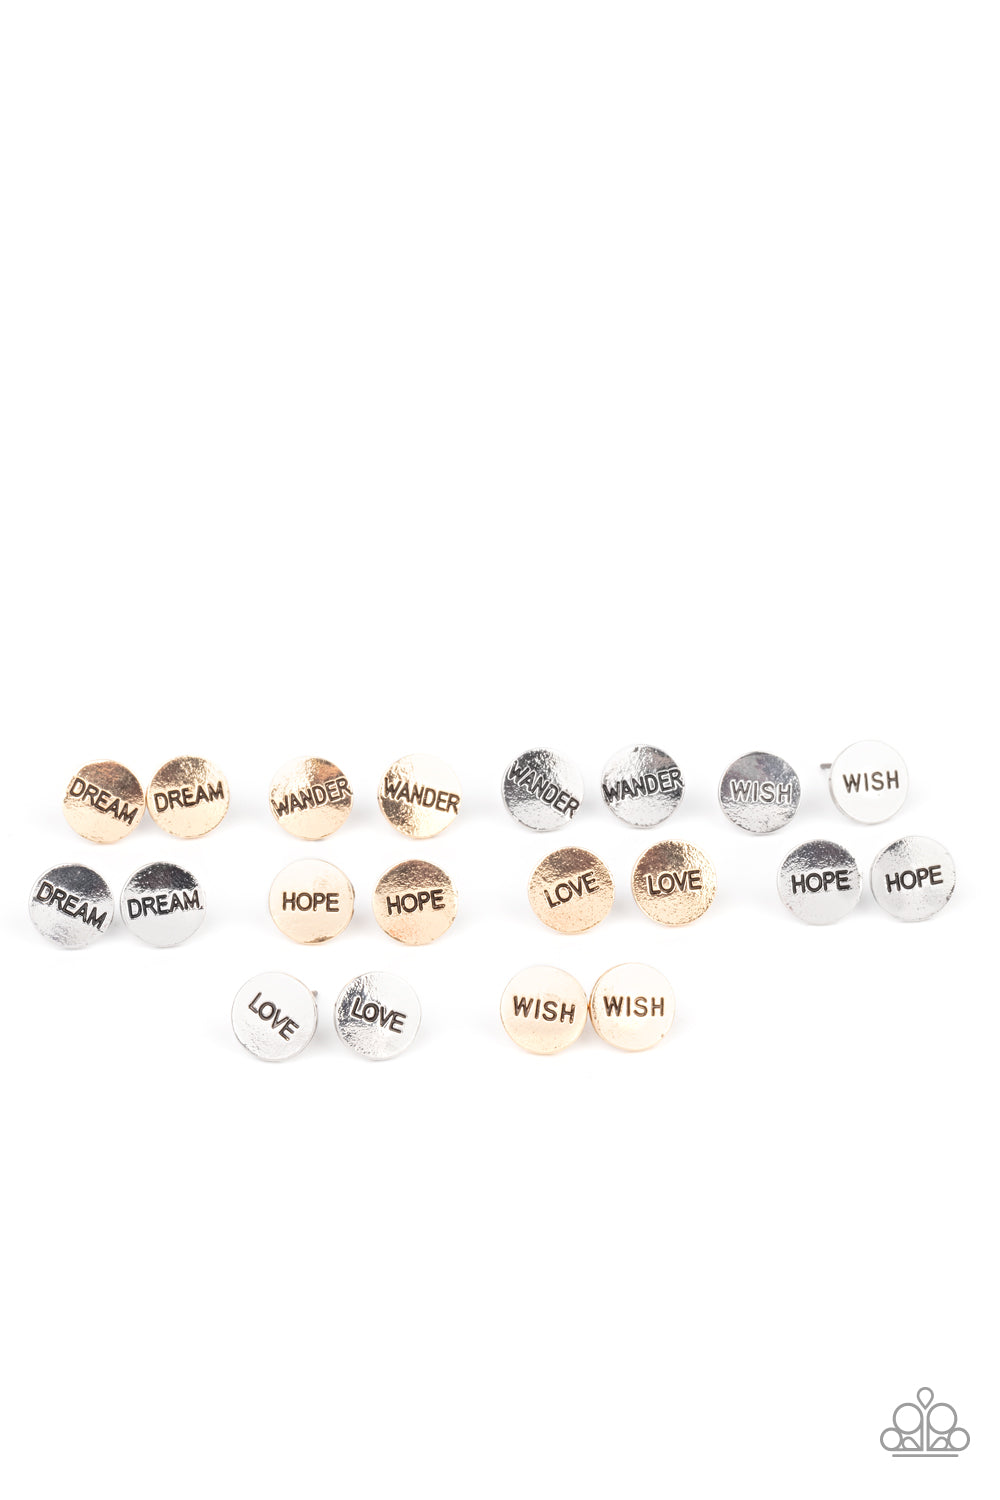 Ten pairs of earrings in gold and silver.  Stamped with inspirational words, 